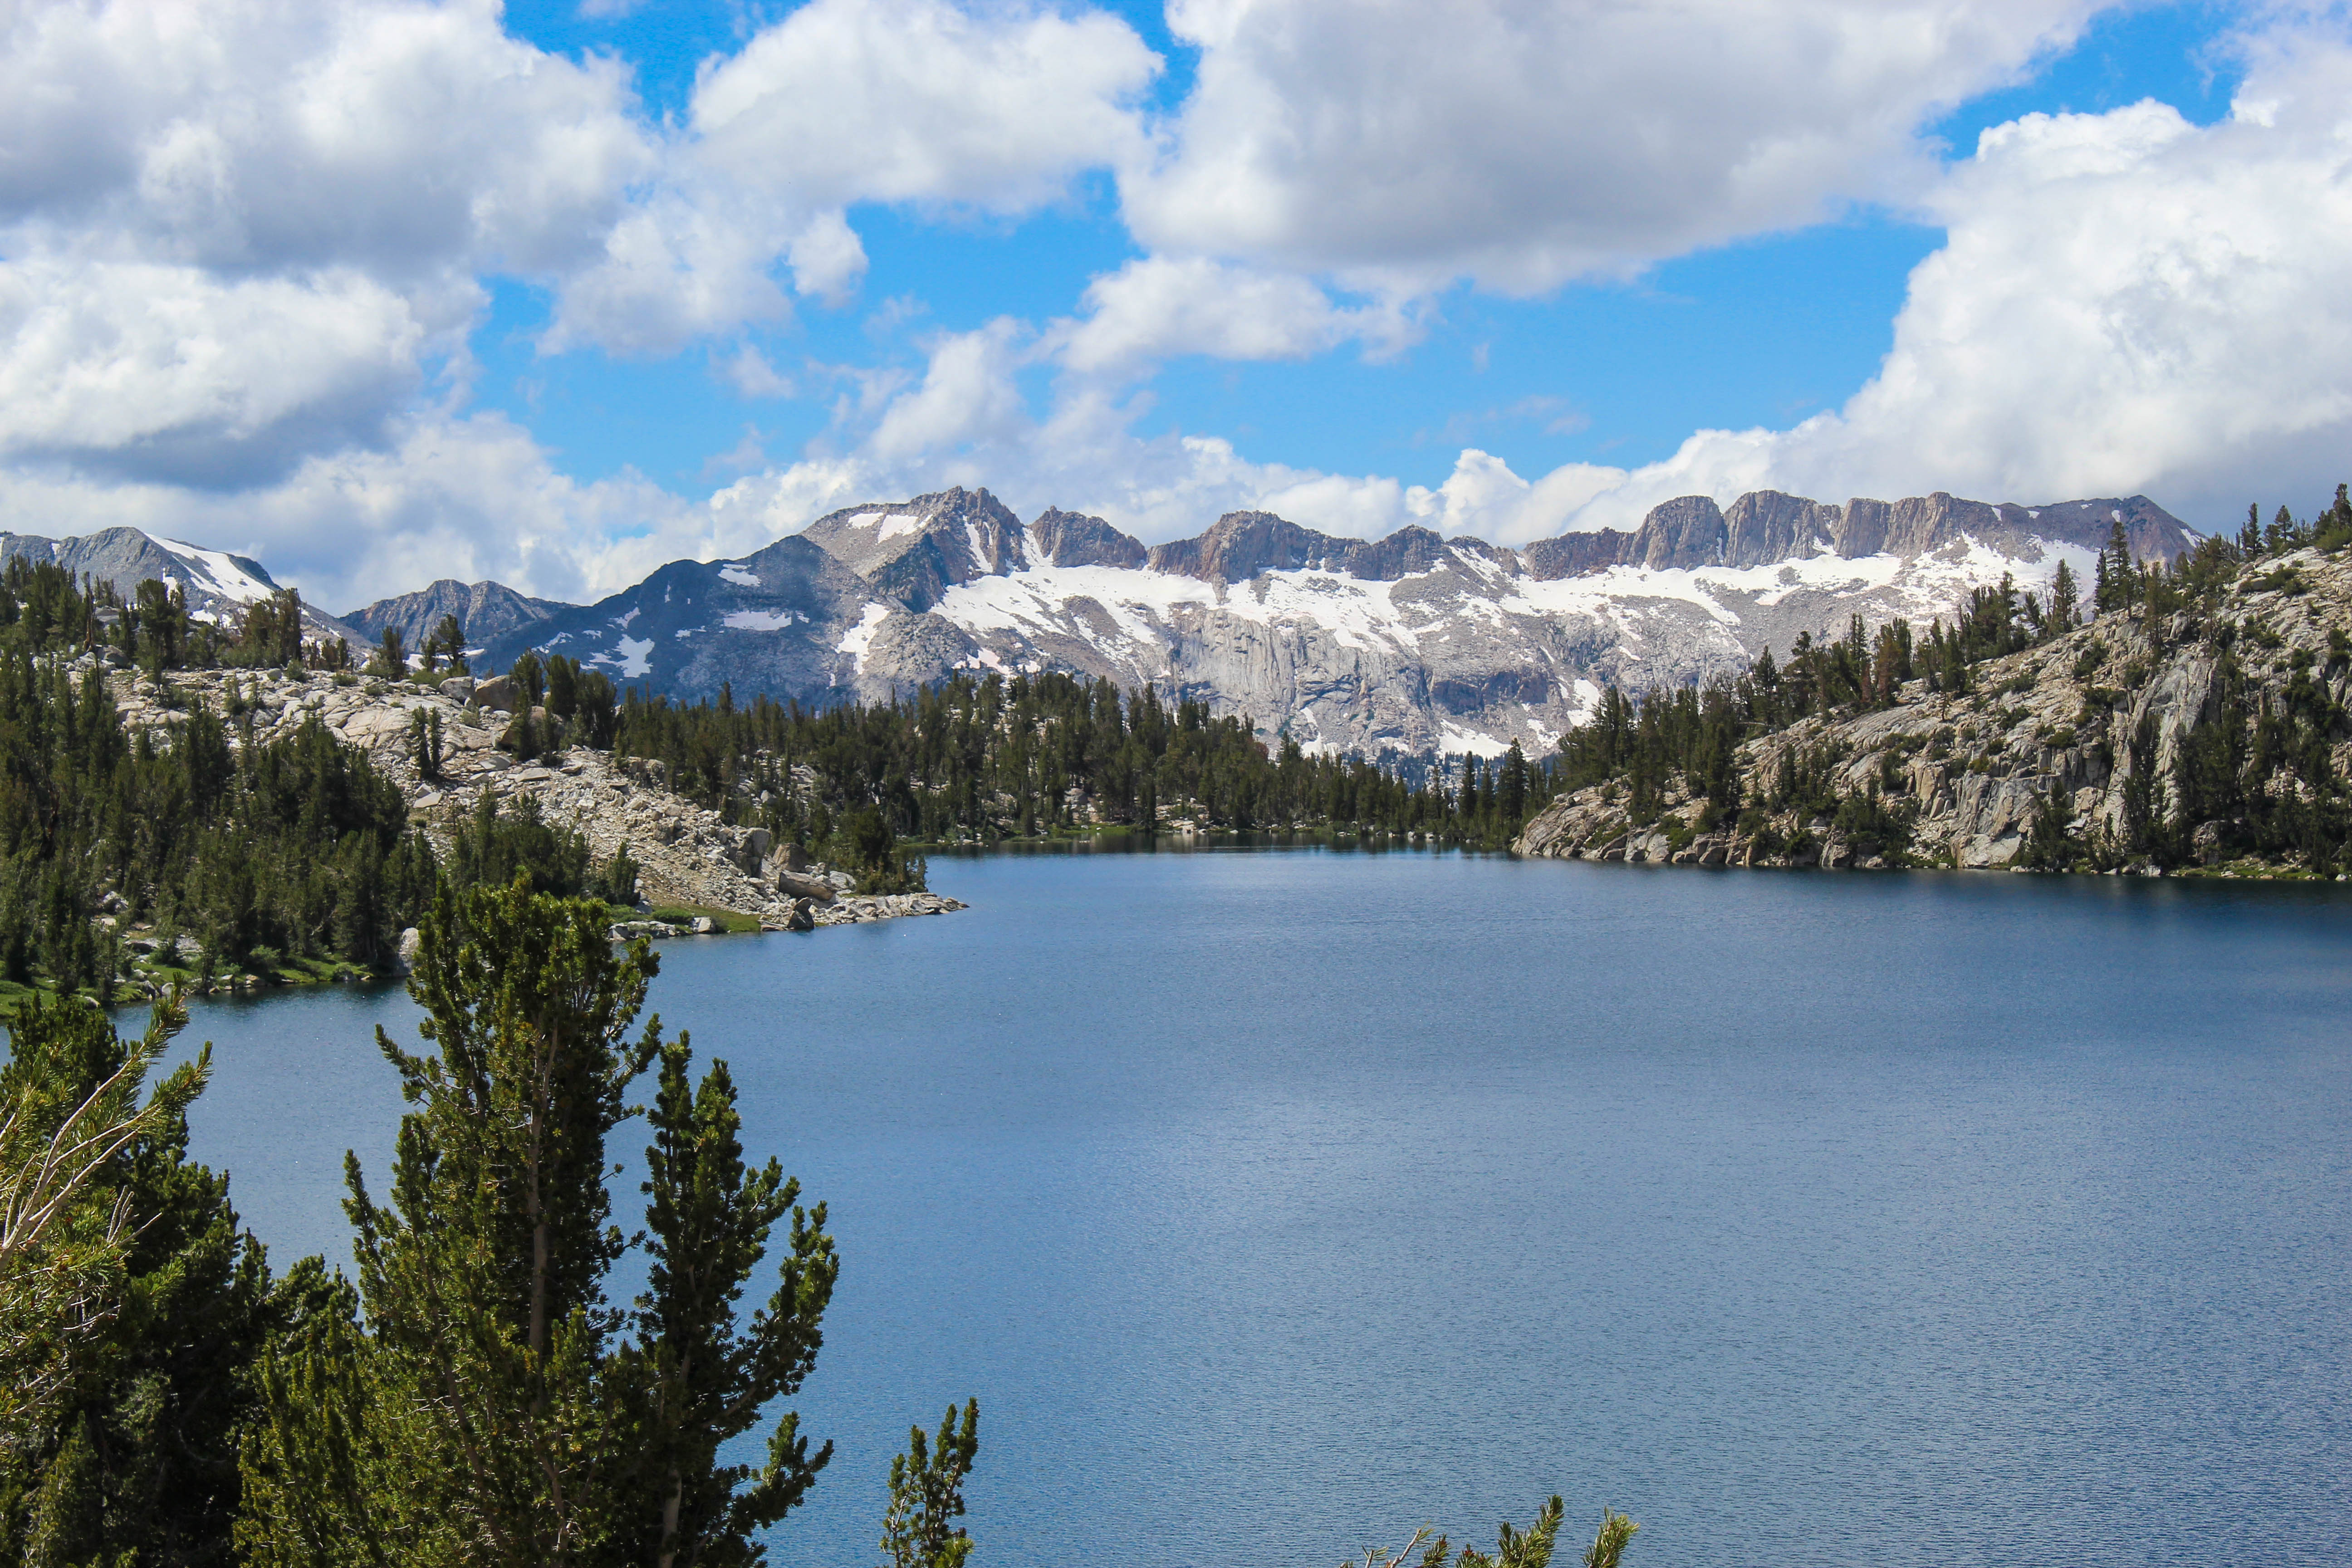 A blue alpine lake gives way to jagged, snow-covered peaks.